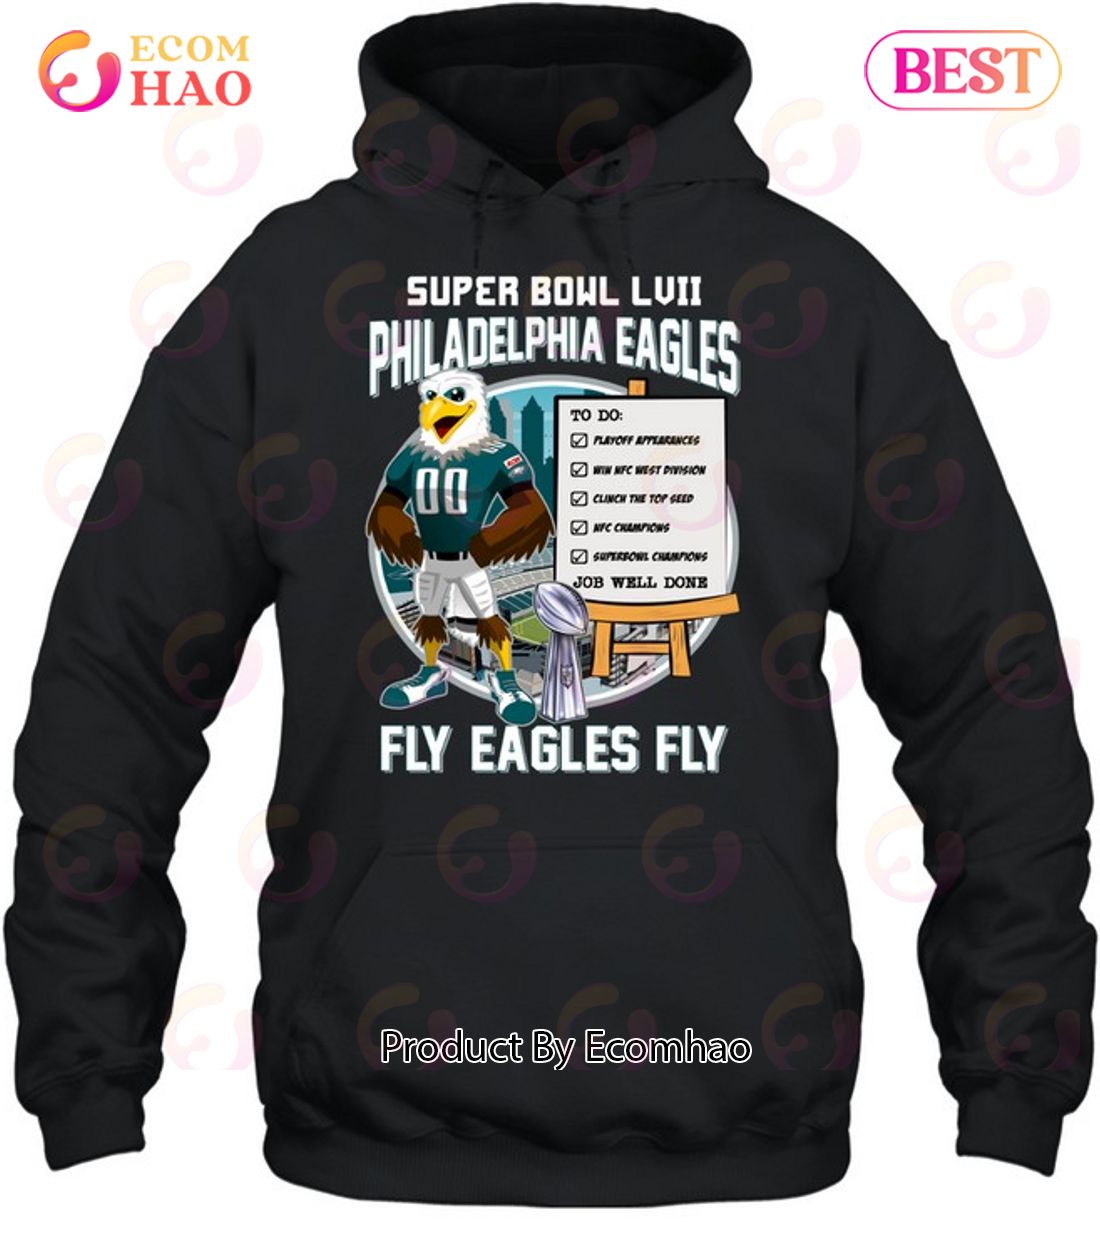 Super Bowl LVII Champions Fly Eagels Fly Hoodie 3D - REVER LAVIE